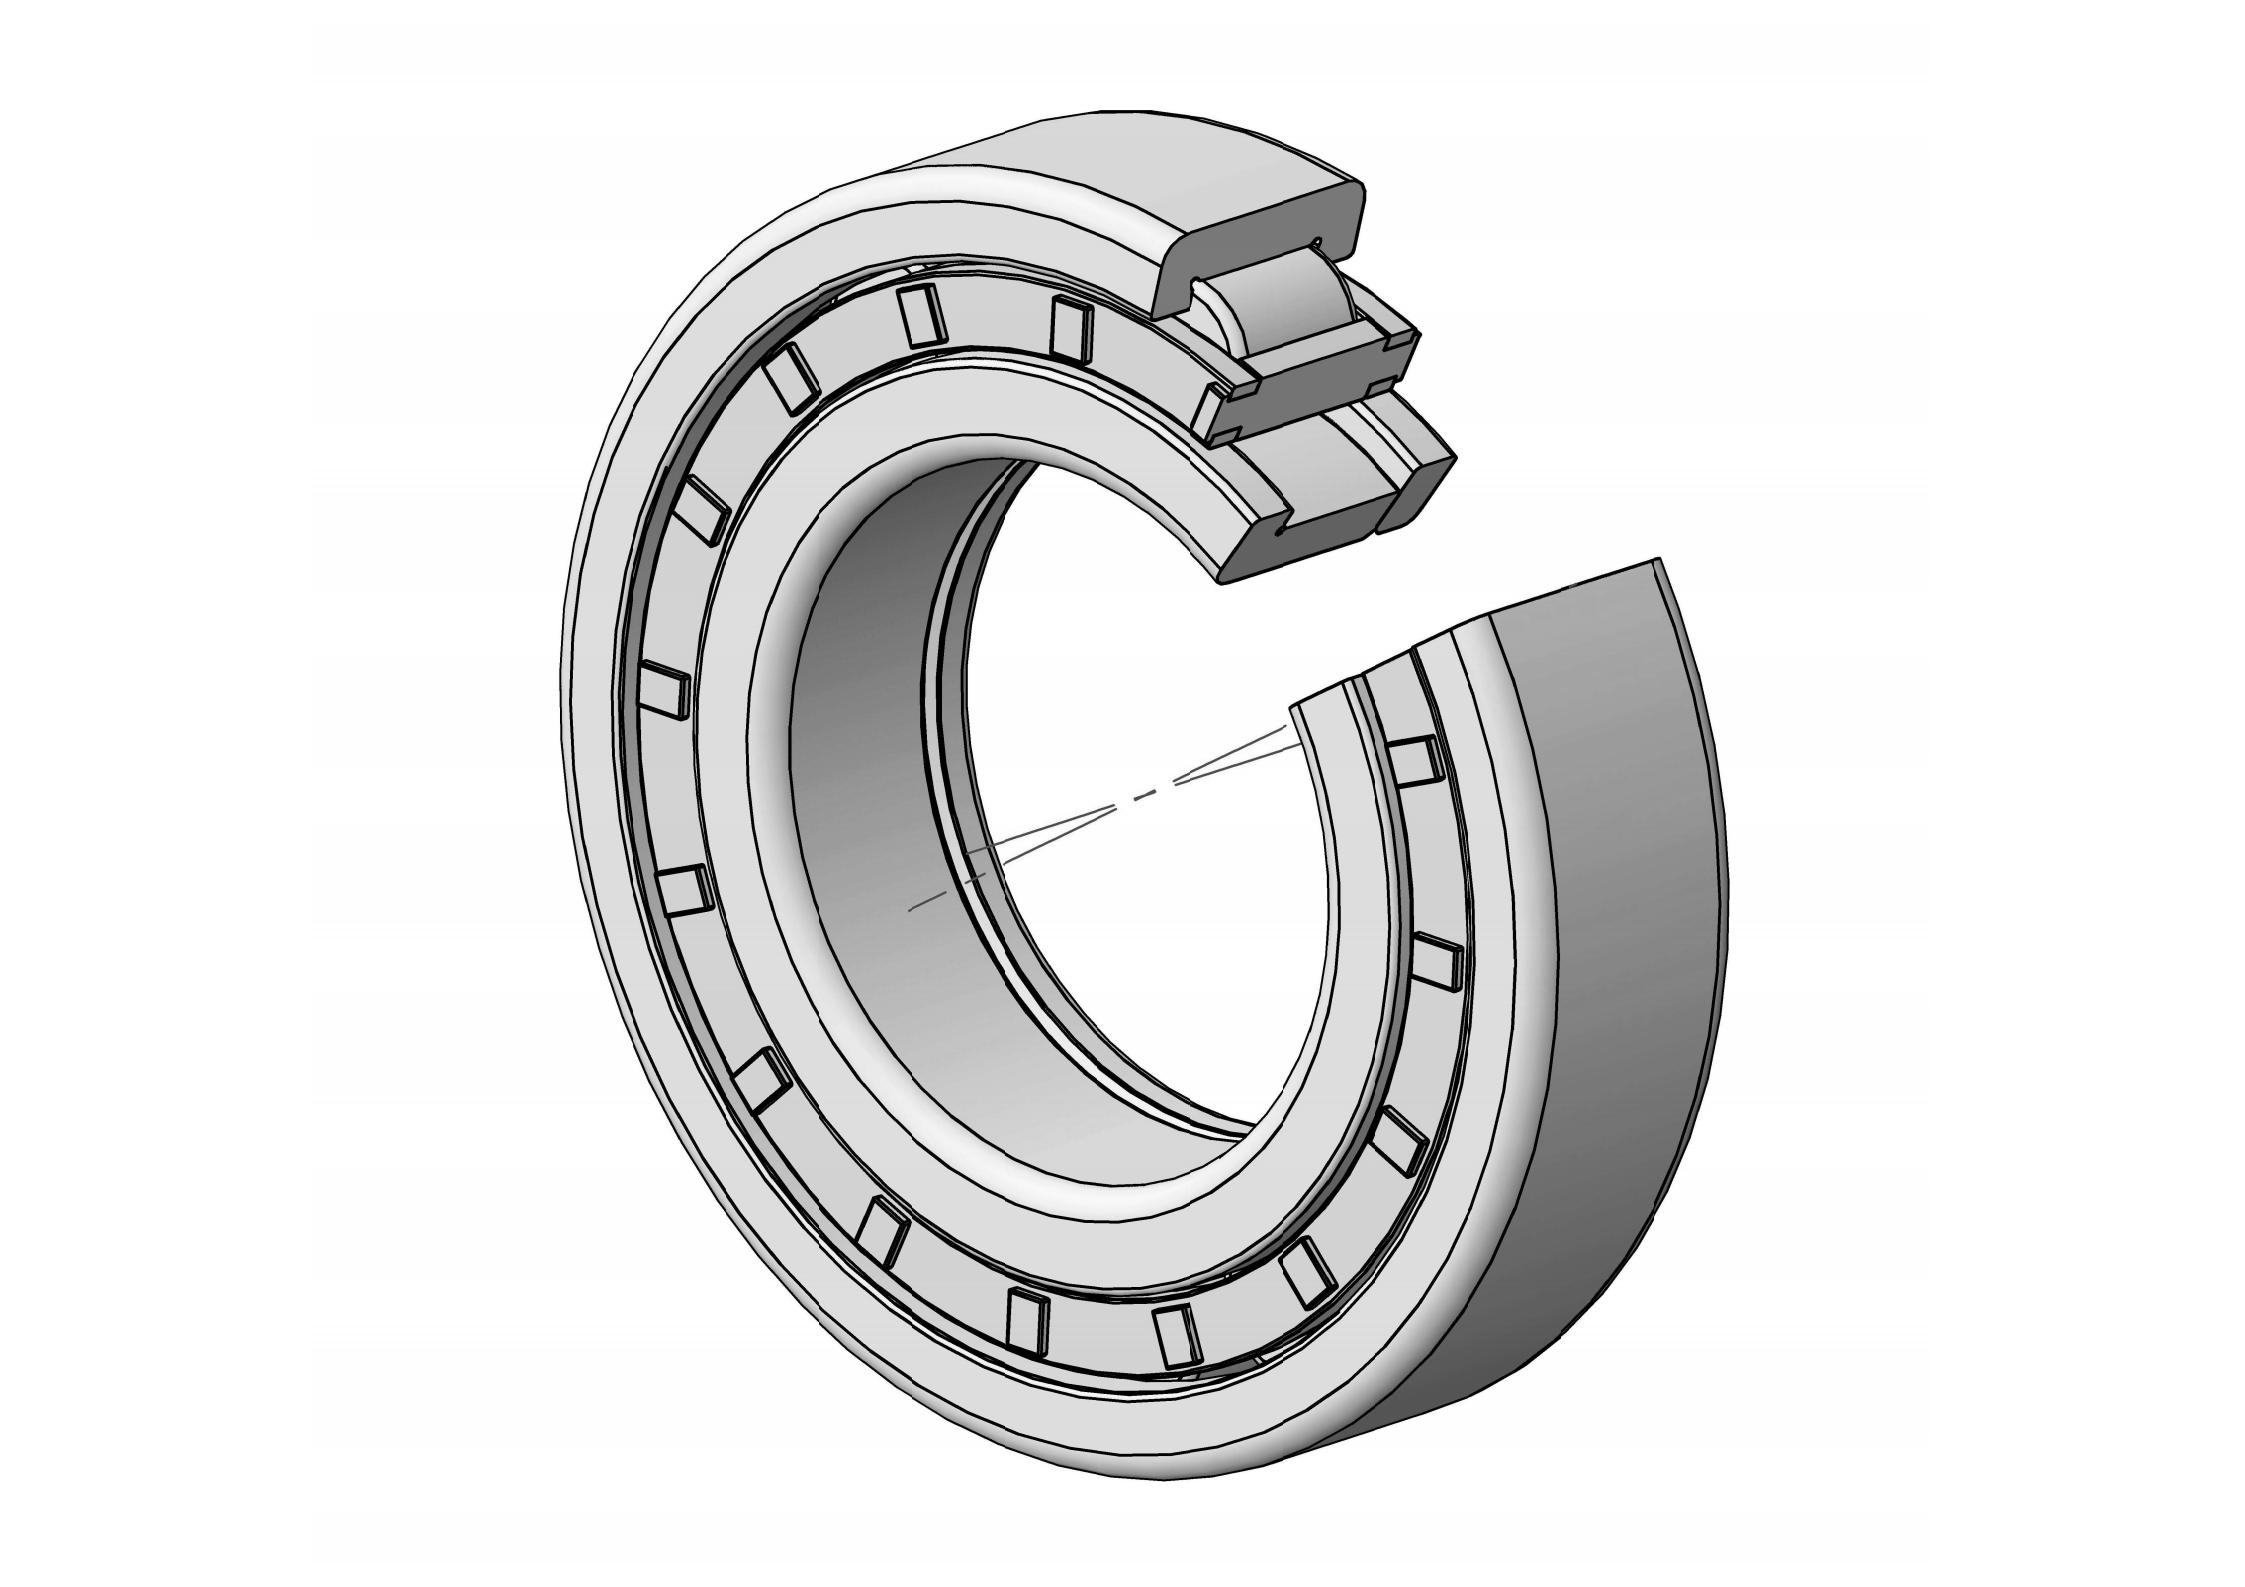 NUP204-E Single Row Cylindrical roller bearing 